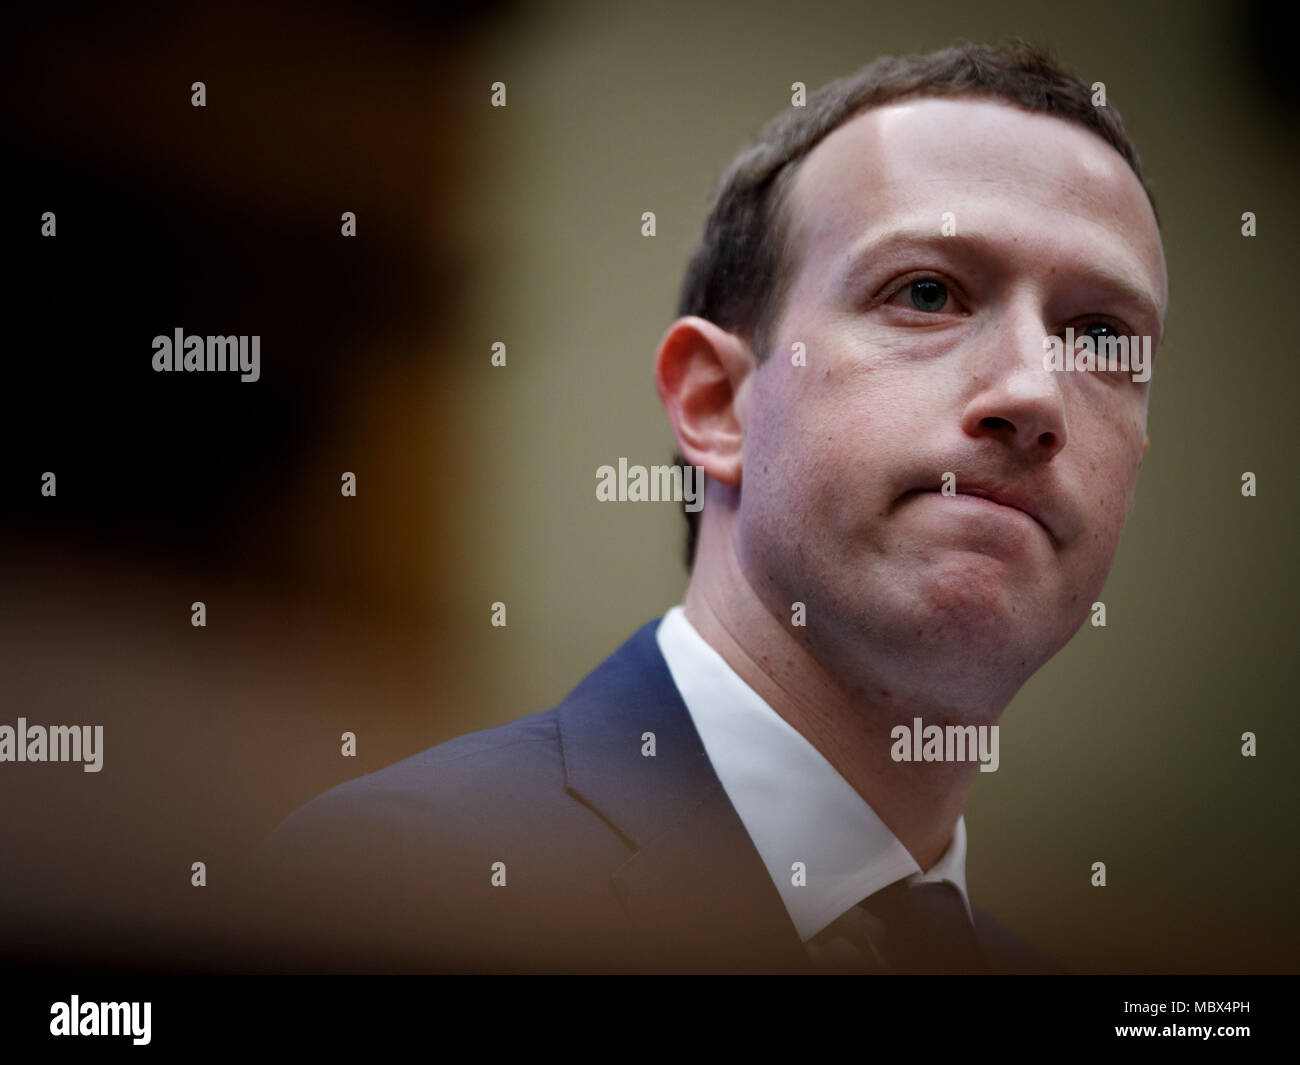 Washington, USA. 11th Apr, 2018. Facebook CEO Mark Zuckerberg testifies before the House Energy and Commerce Committee on Capitol Hill in Washington, DC, the United States, on April 11, 2018. Credit: Ting Shen/Xinhua/Alamy Live News Stock Photo